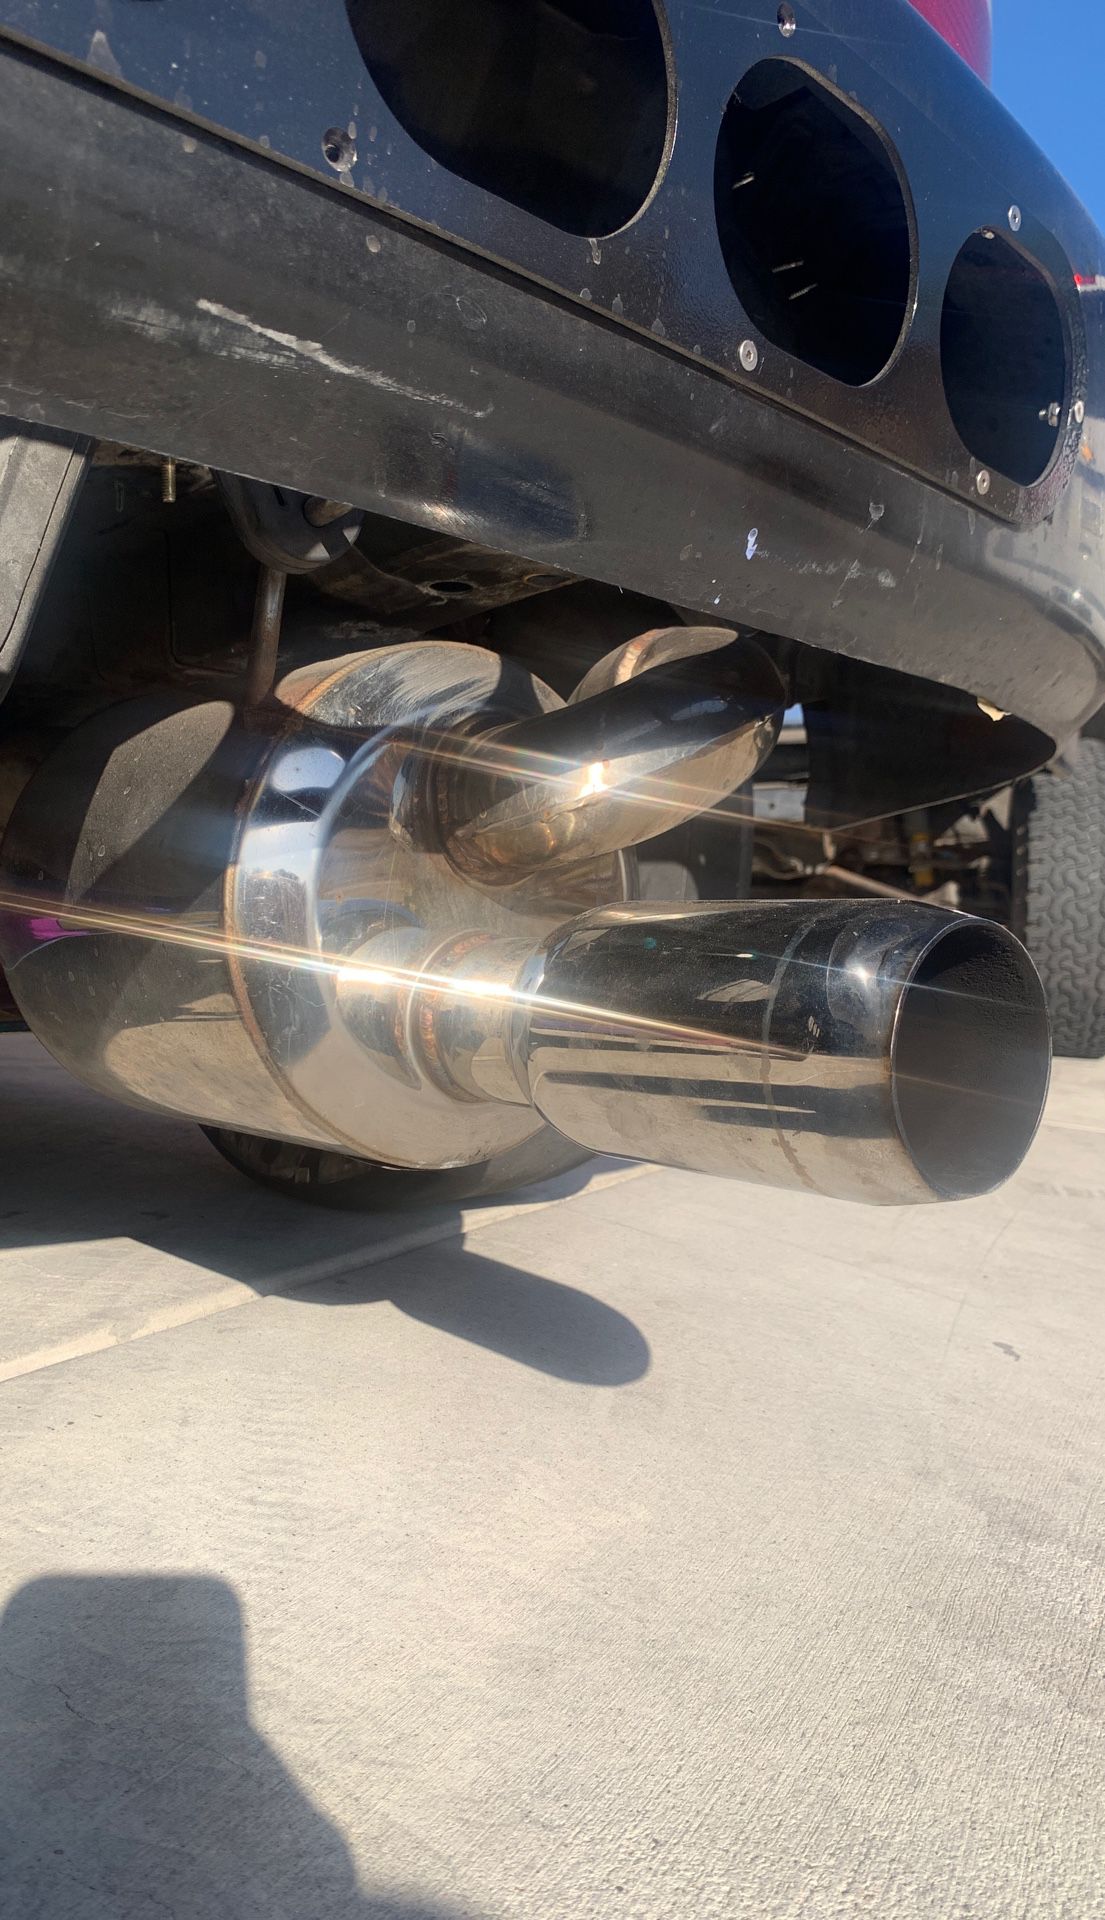 OBX Racing sports muffler for sale or trade for another muffler